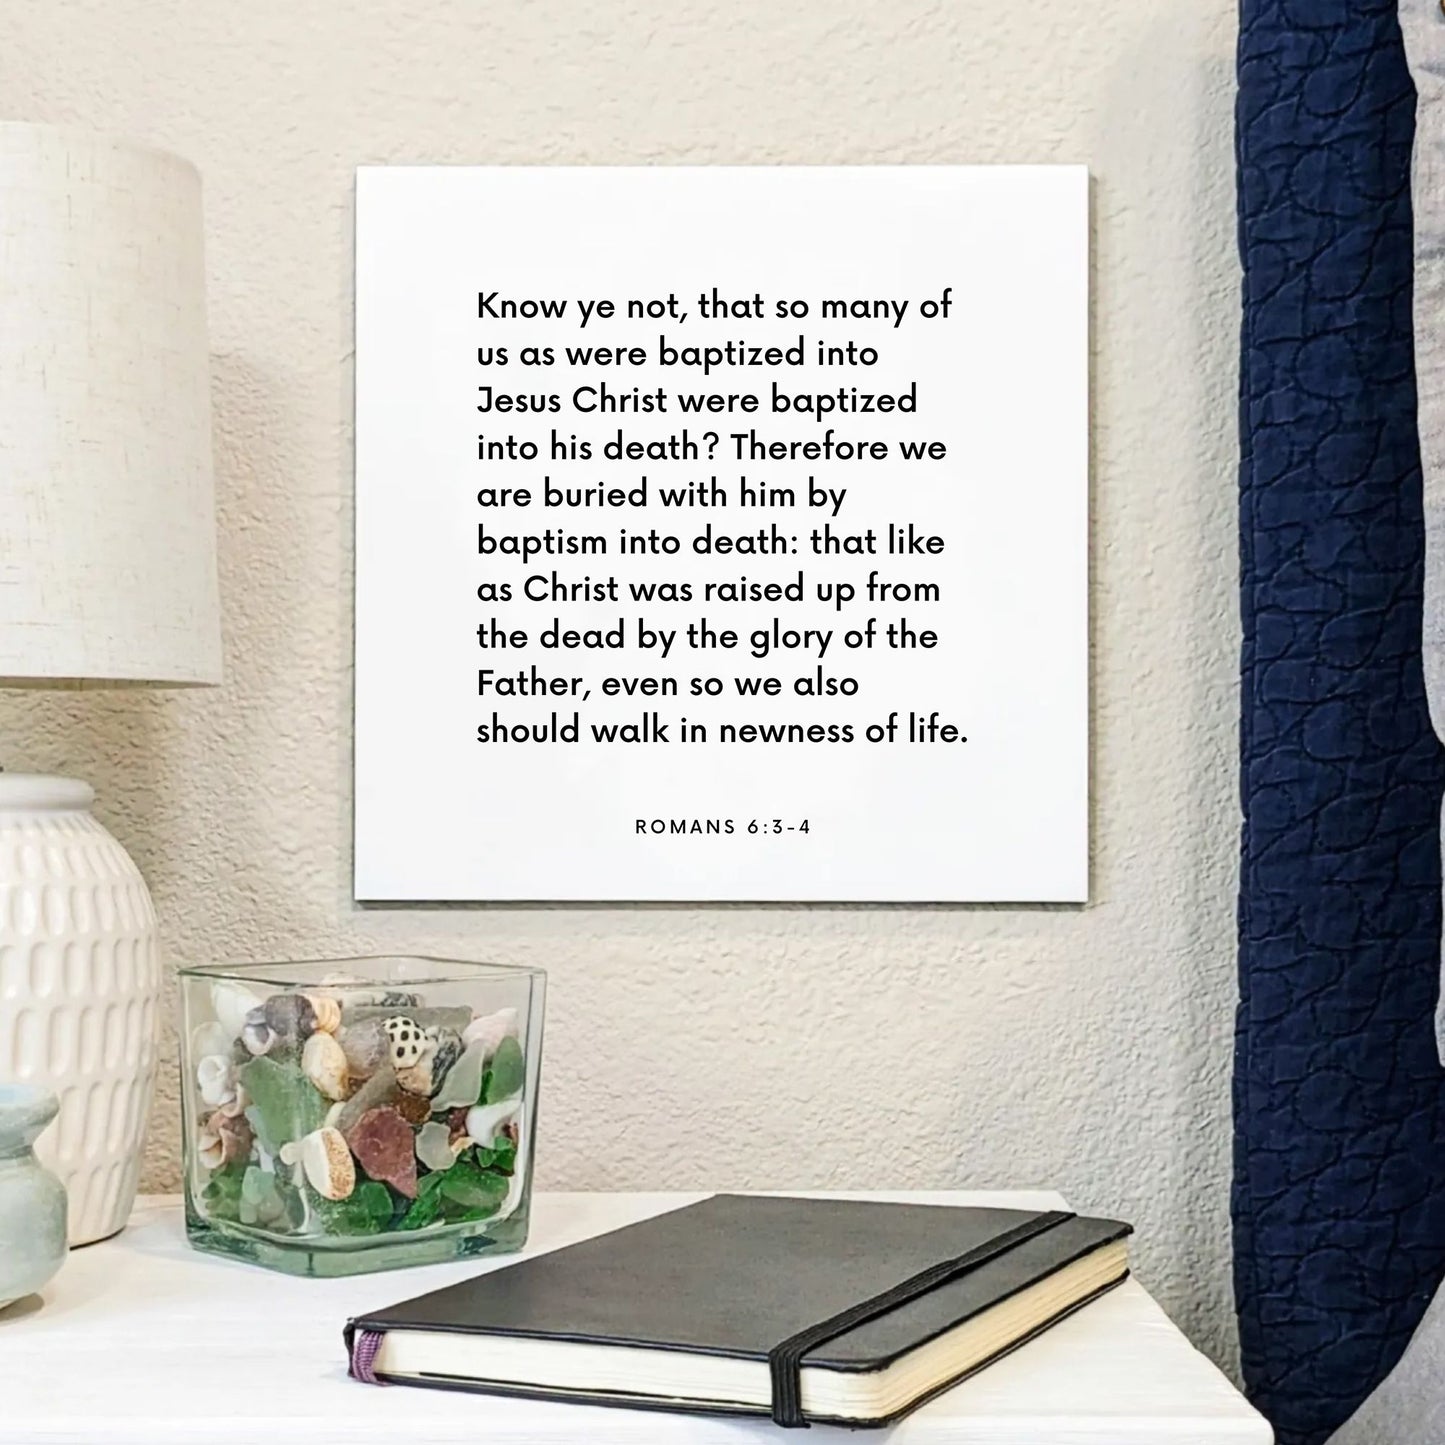 Bedside mouting of the scripture tile for Romans 6:3-4 - "We are buried with him by baptism"